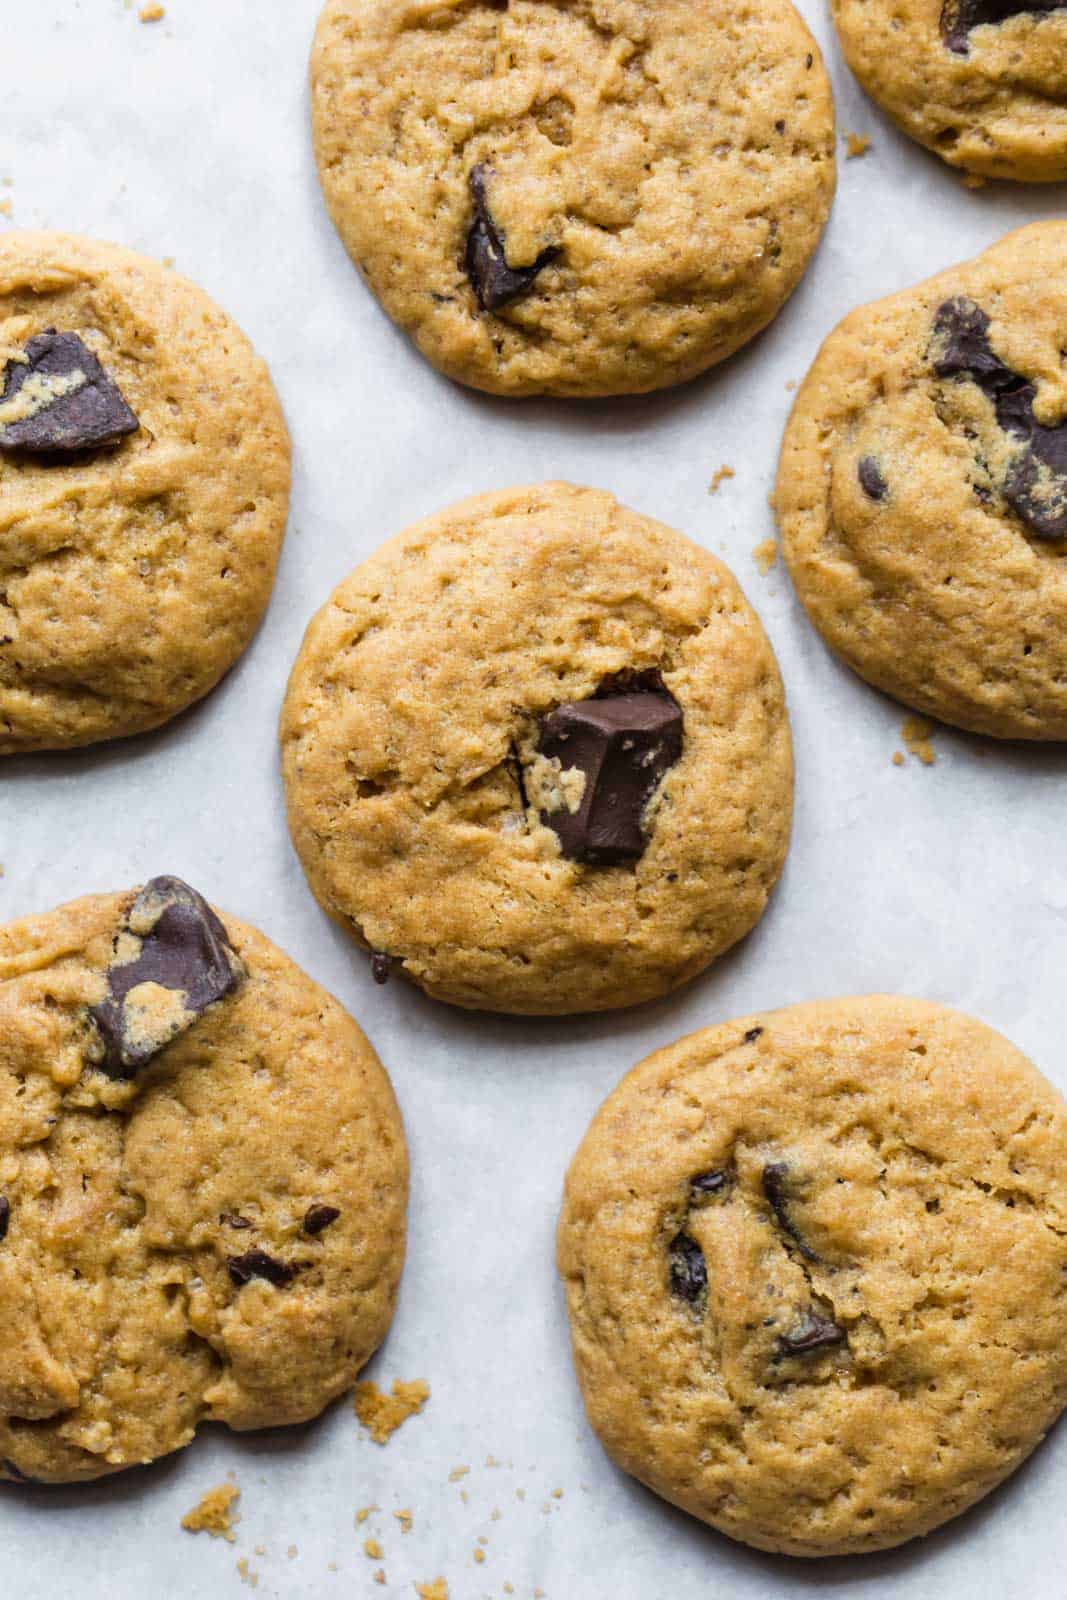 Eggless chocolate chips cookies freshly baked on a cookie sheet